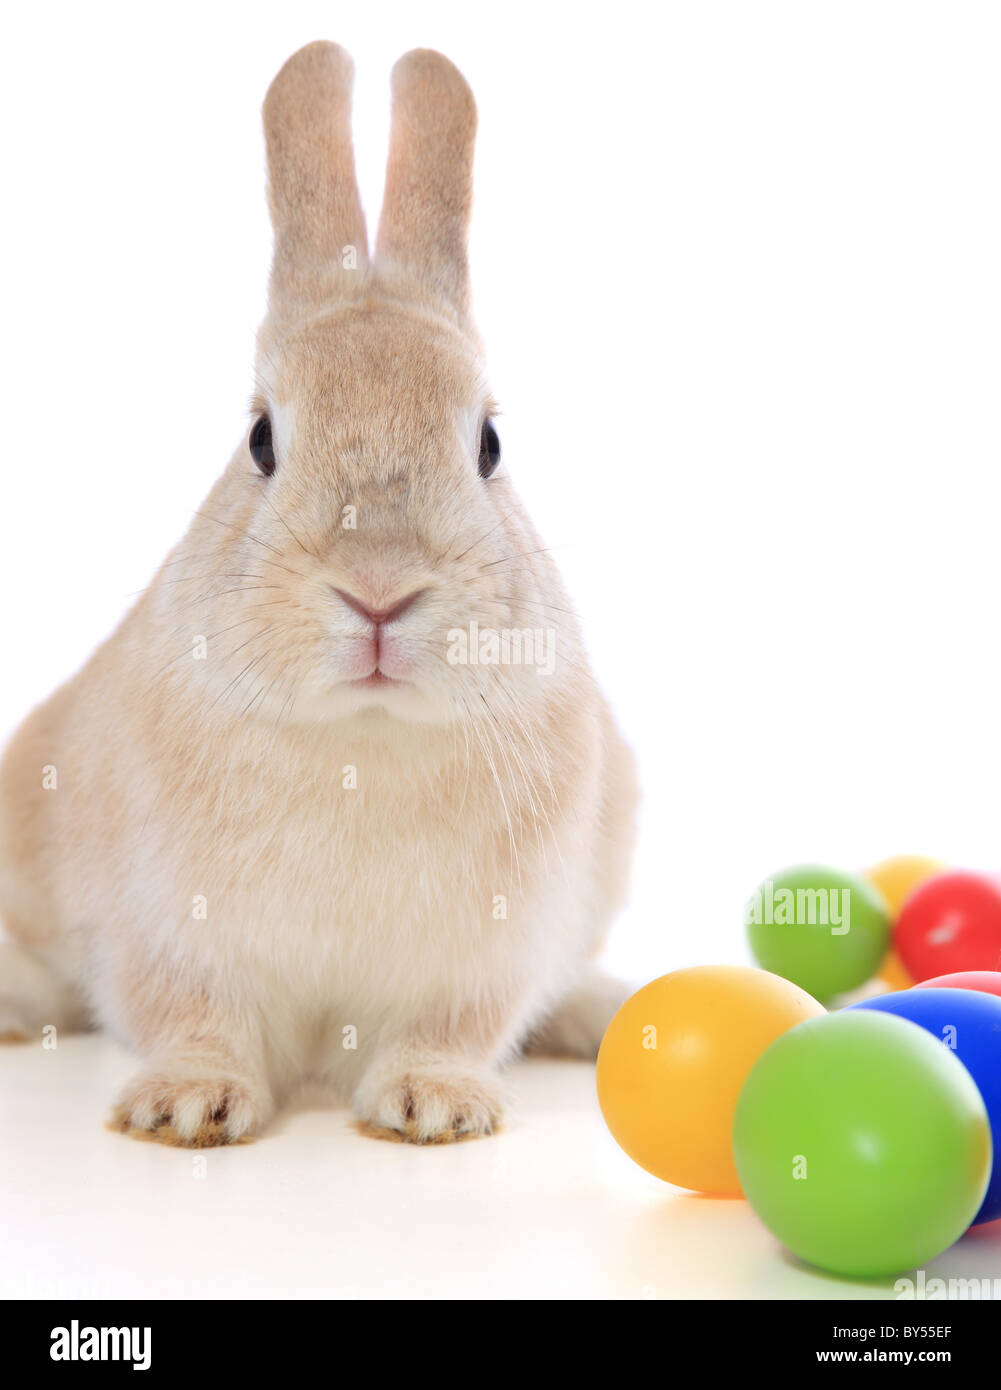 Cute little easter bunny with colored eggs. All on white background. Stock Photo